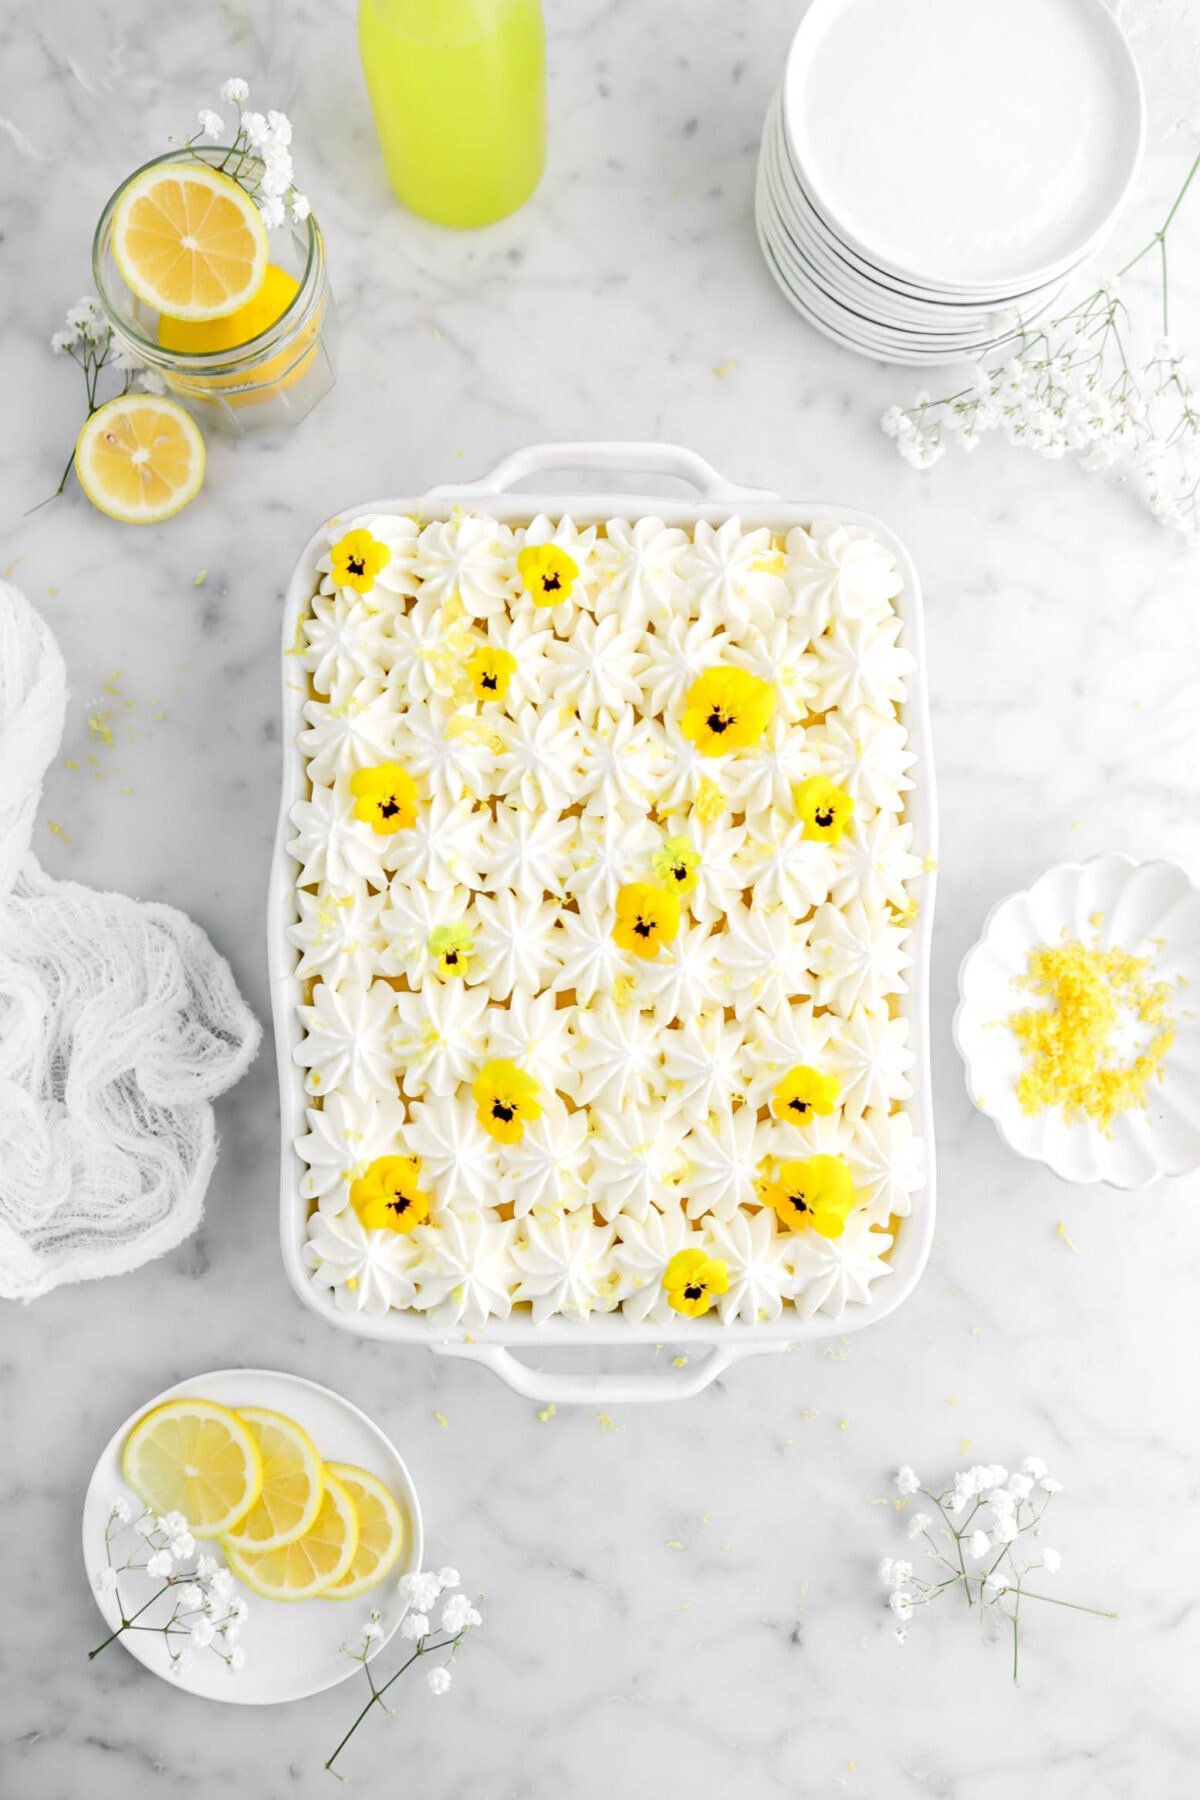 pulled back overhead shot of lemon tiramisu with yellow pansies on top with bowl of lemon zest beside, a plate of lemon slices, stack of white places, and glass of limoncello around on marble surface.